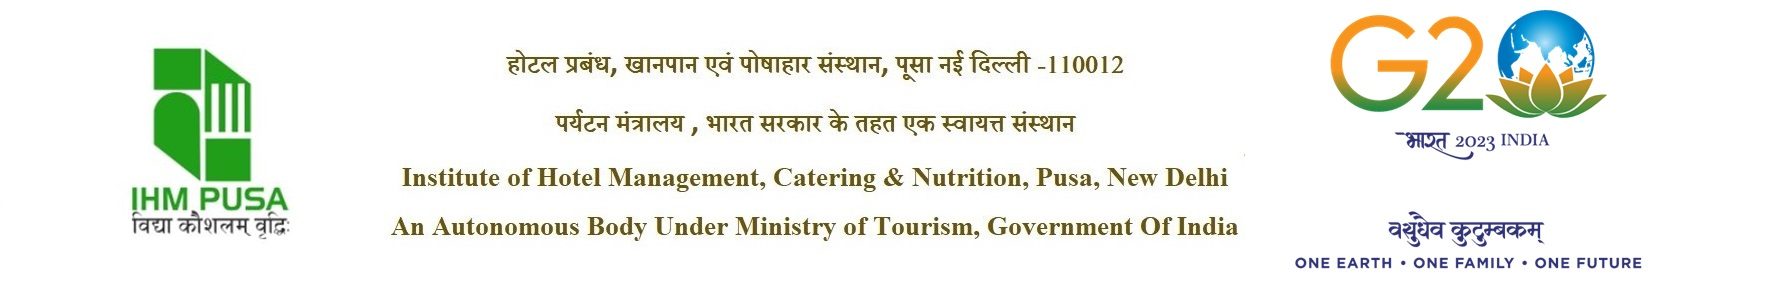 Institute Of Hotel Management Catering And Nutrition, Pusa Logo